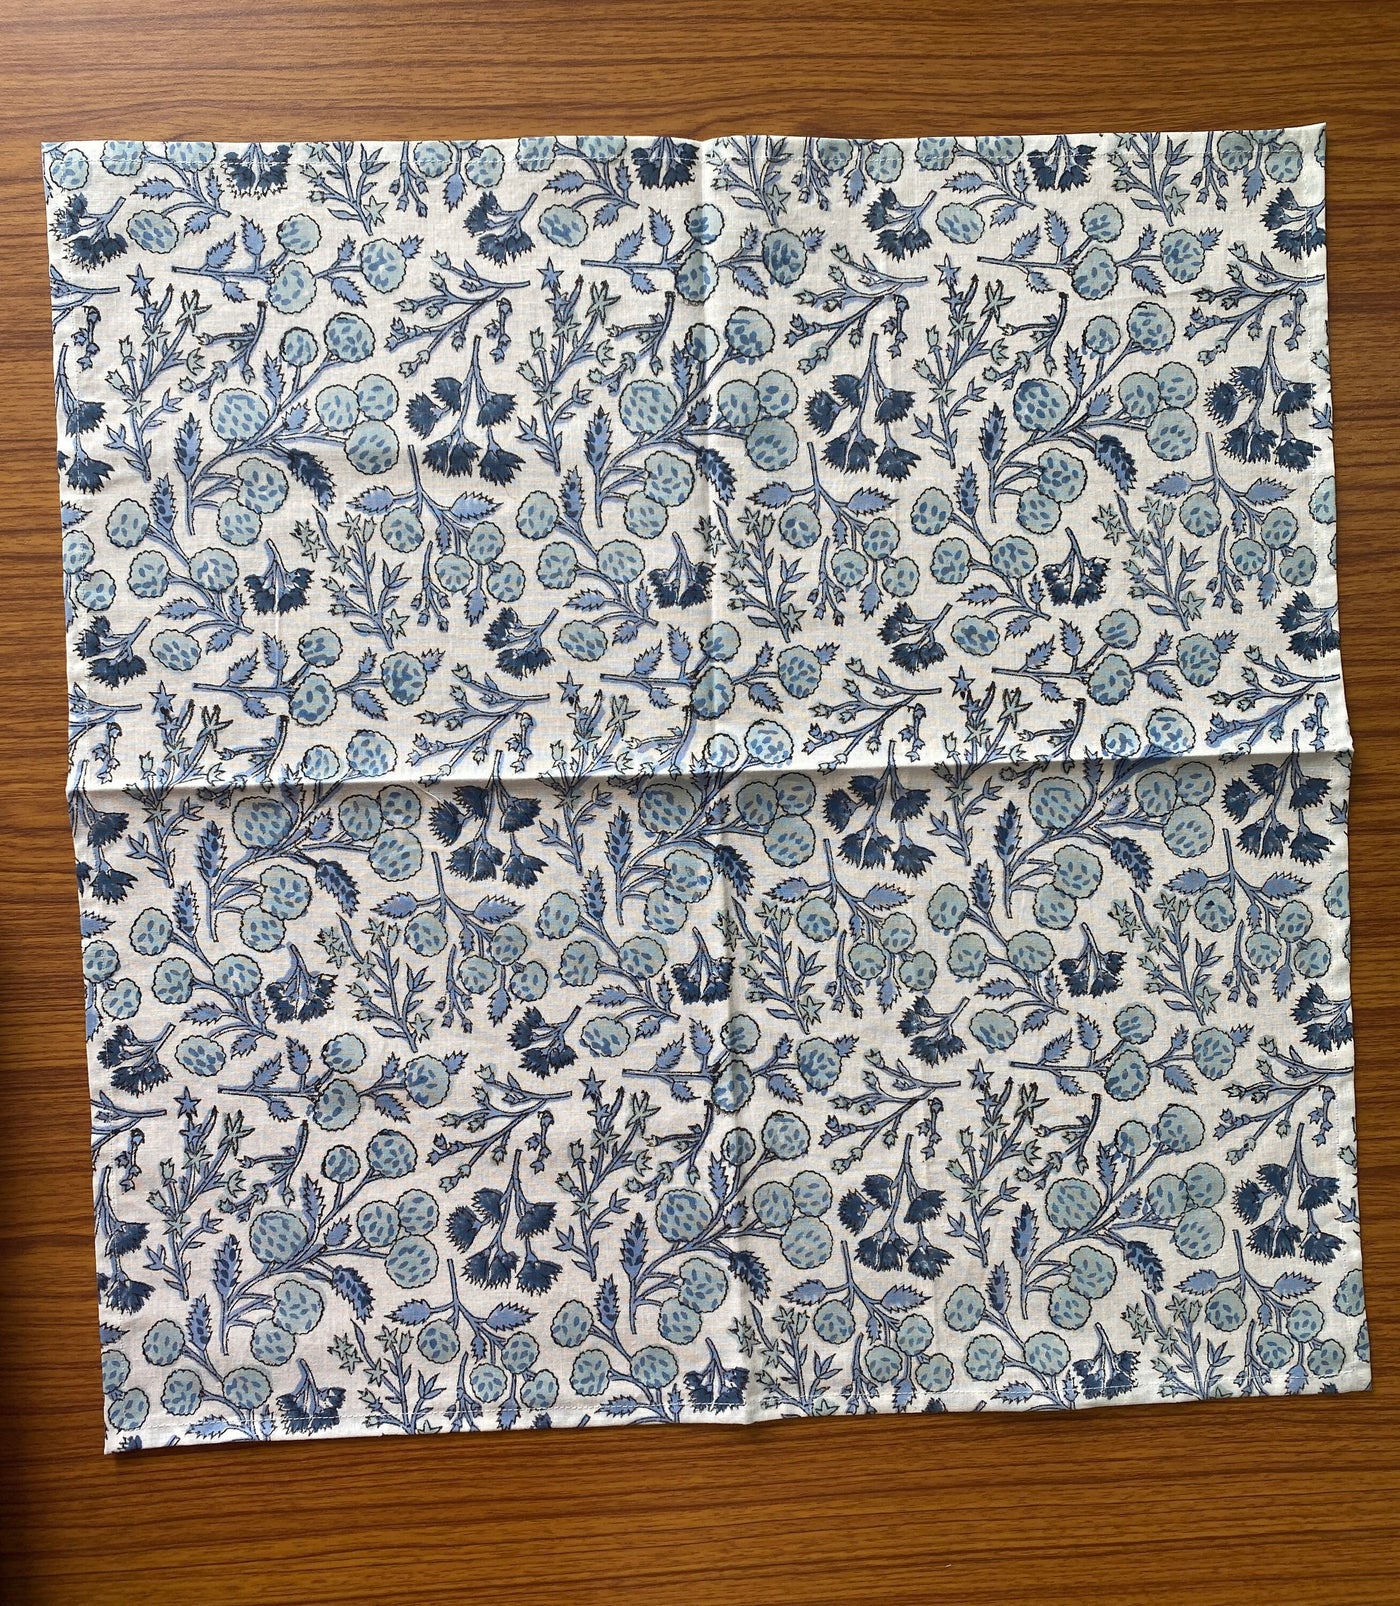 Denim and Baby Blue on White Indian Hand Block Floral Printed 100% Pure Cotton Cloth Napkins, 18x18"- Cocktail Napkins, 20x20"- Dinner Napkins